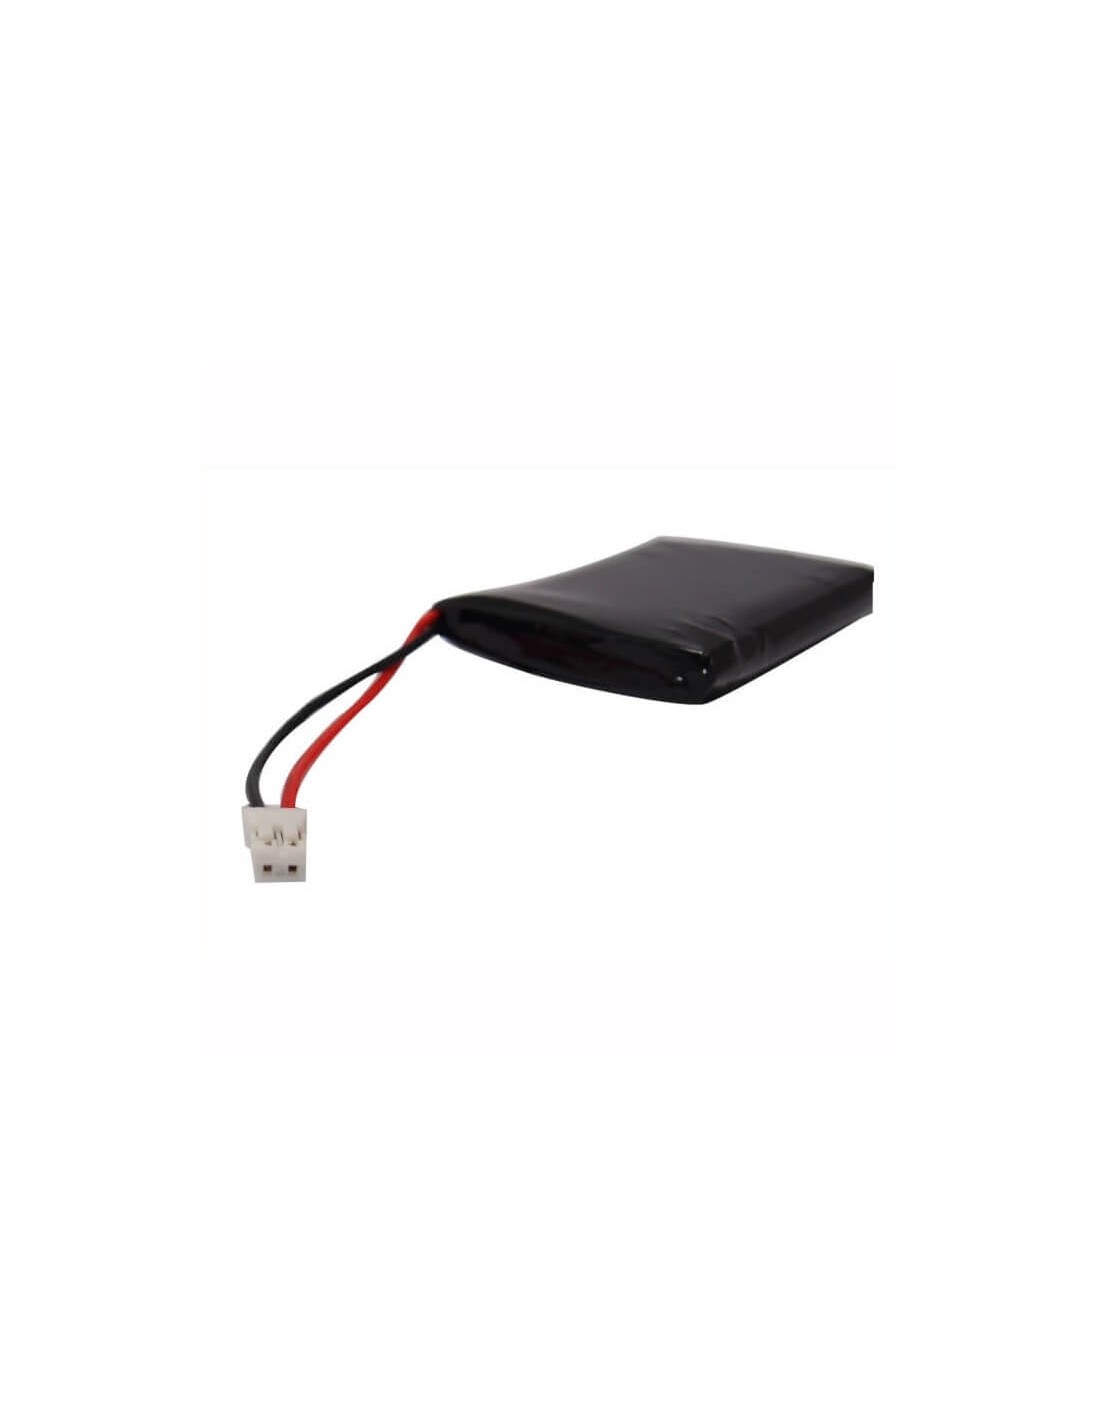 Battery for Aaxa P1 Pico Projector 3.7V, 1700mAh - 6.29Wh